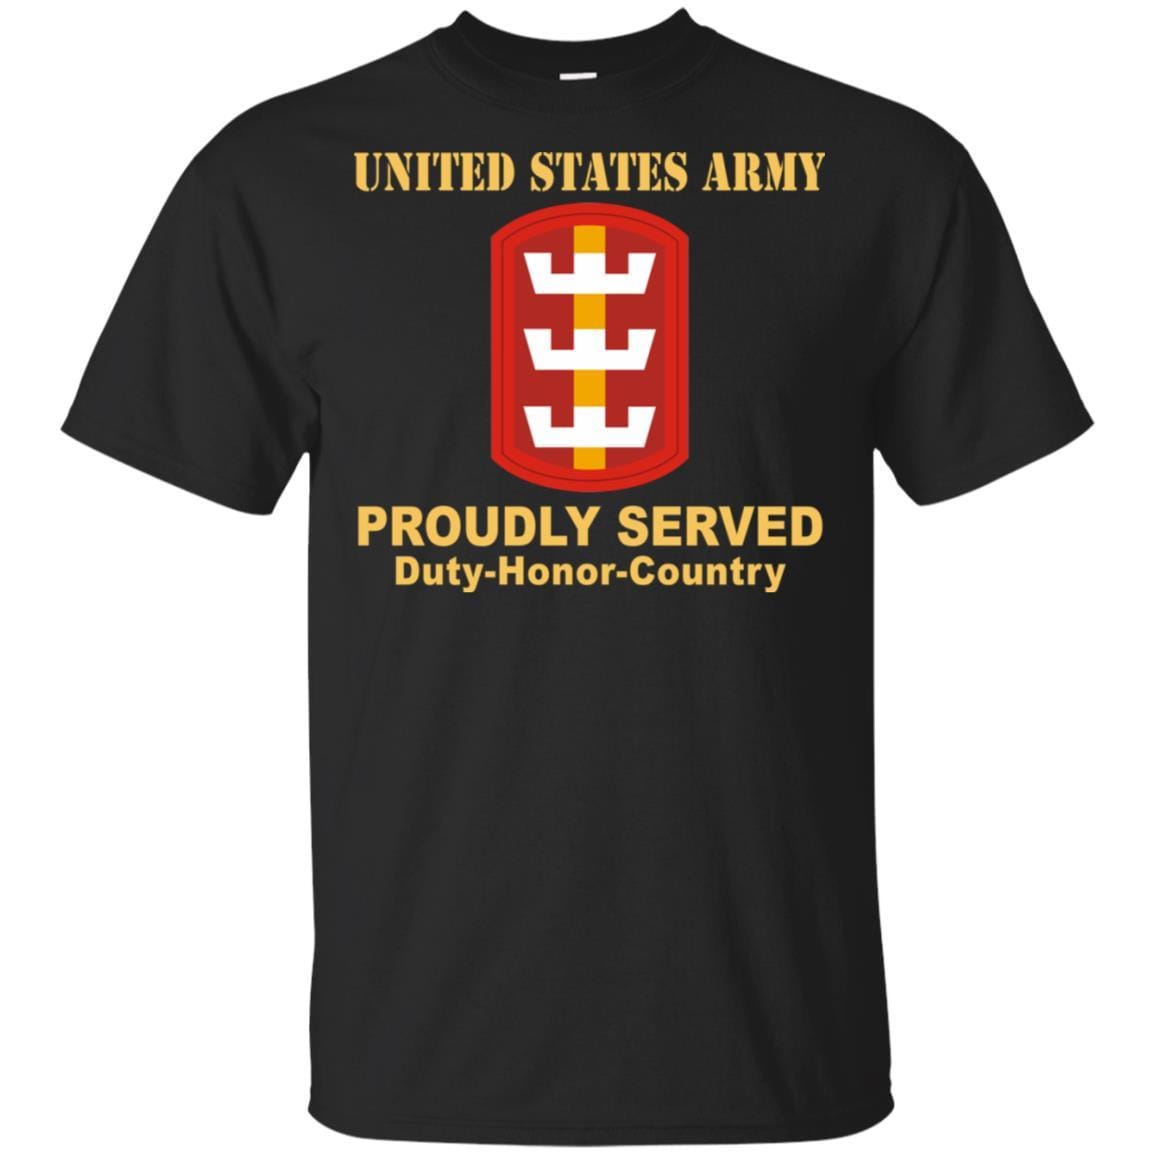 US ARMY 130TH ENGINEER BRIGADE - Proudly Served T-Shirt On Front For Men-TShirt-Army-Veterans Nation